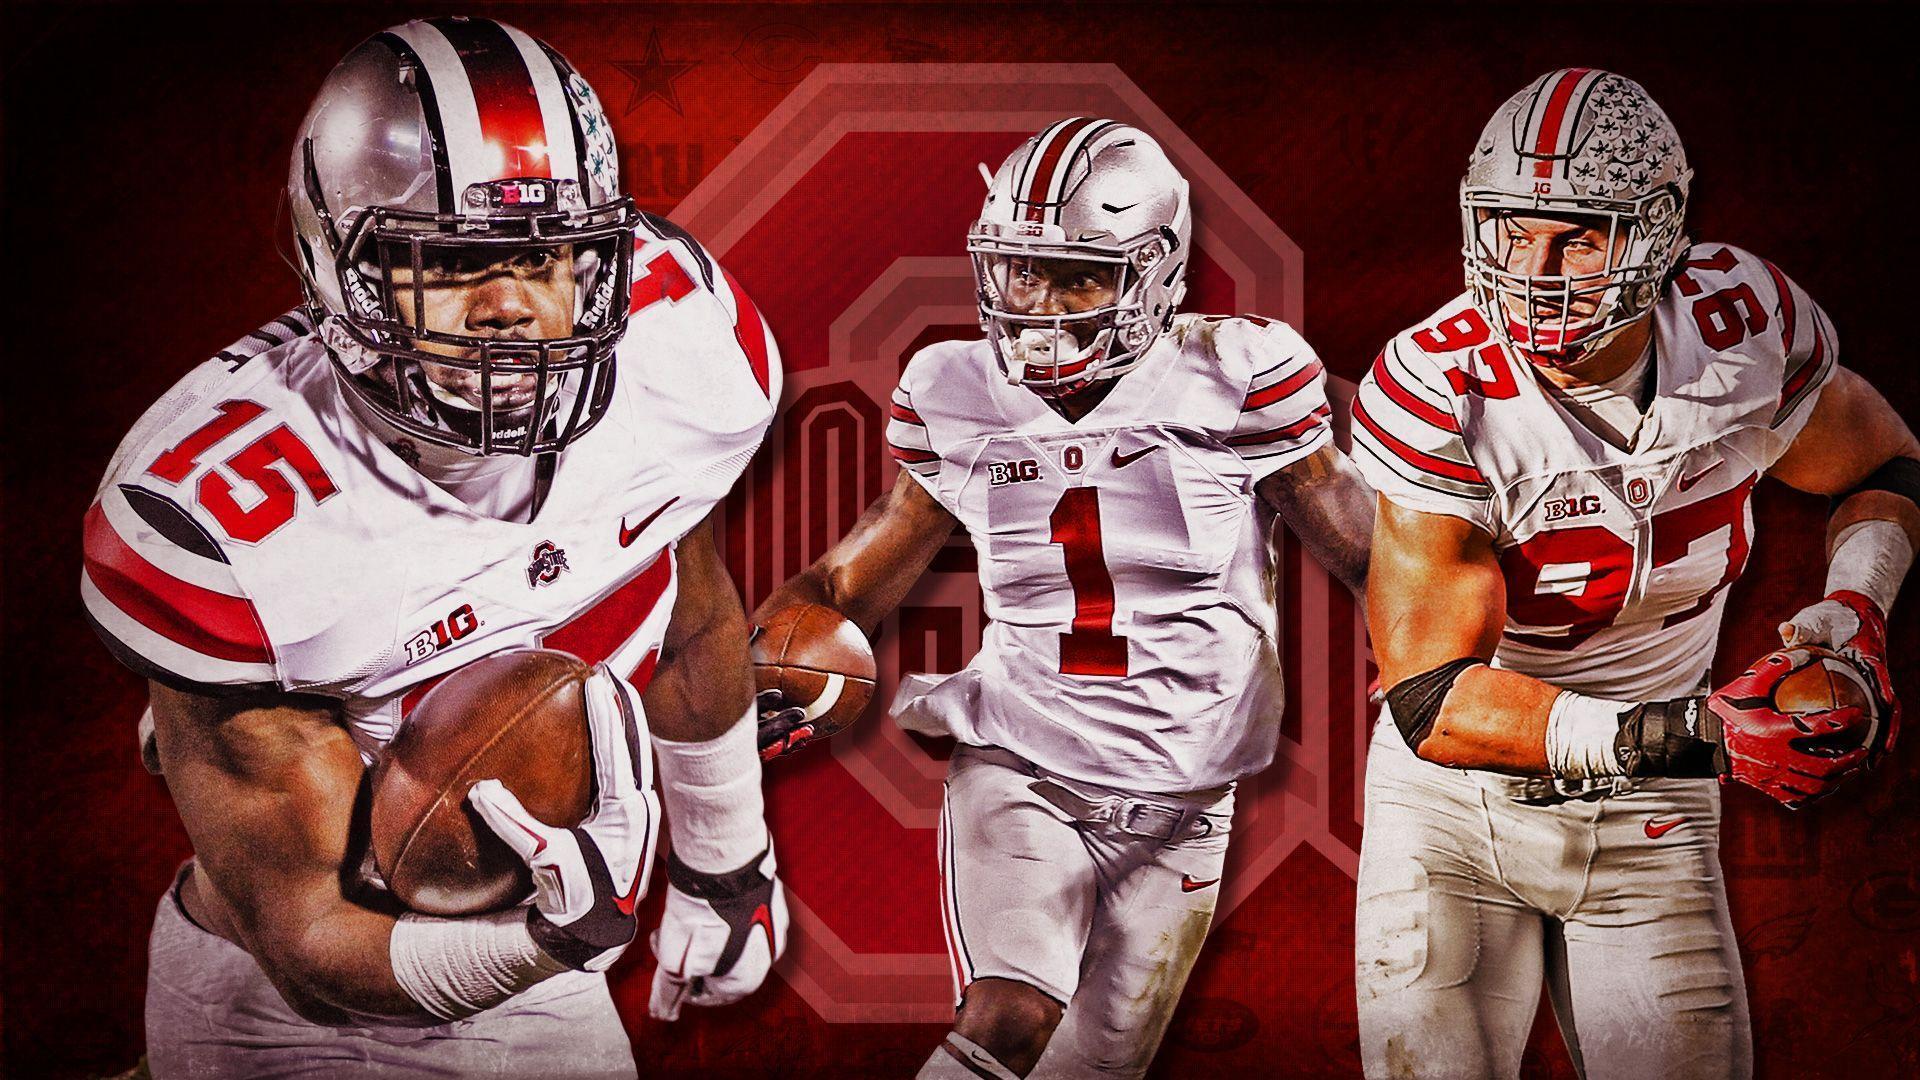 Ohio State's 2016 draft class built to be best ever. NFL